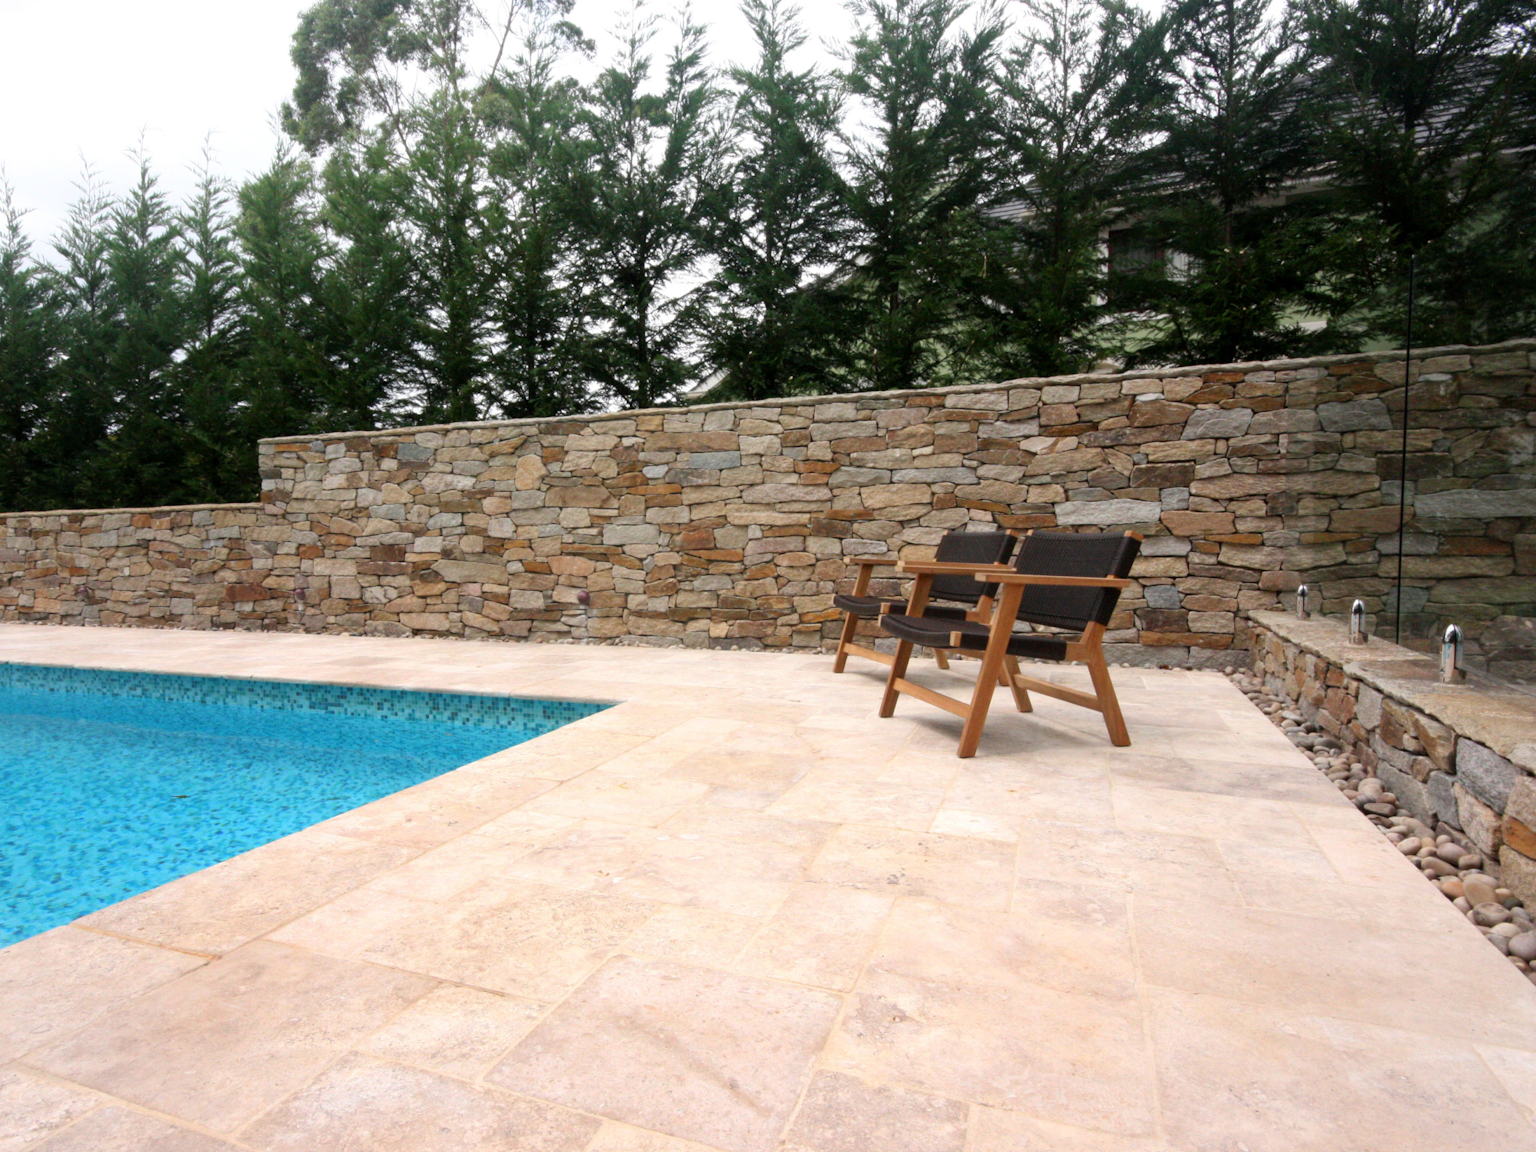 Capri travertine pool coping and paving with Alpine dry stone walling